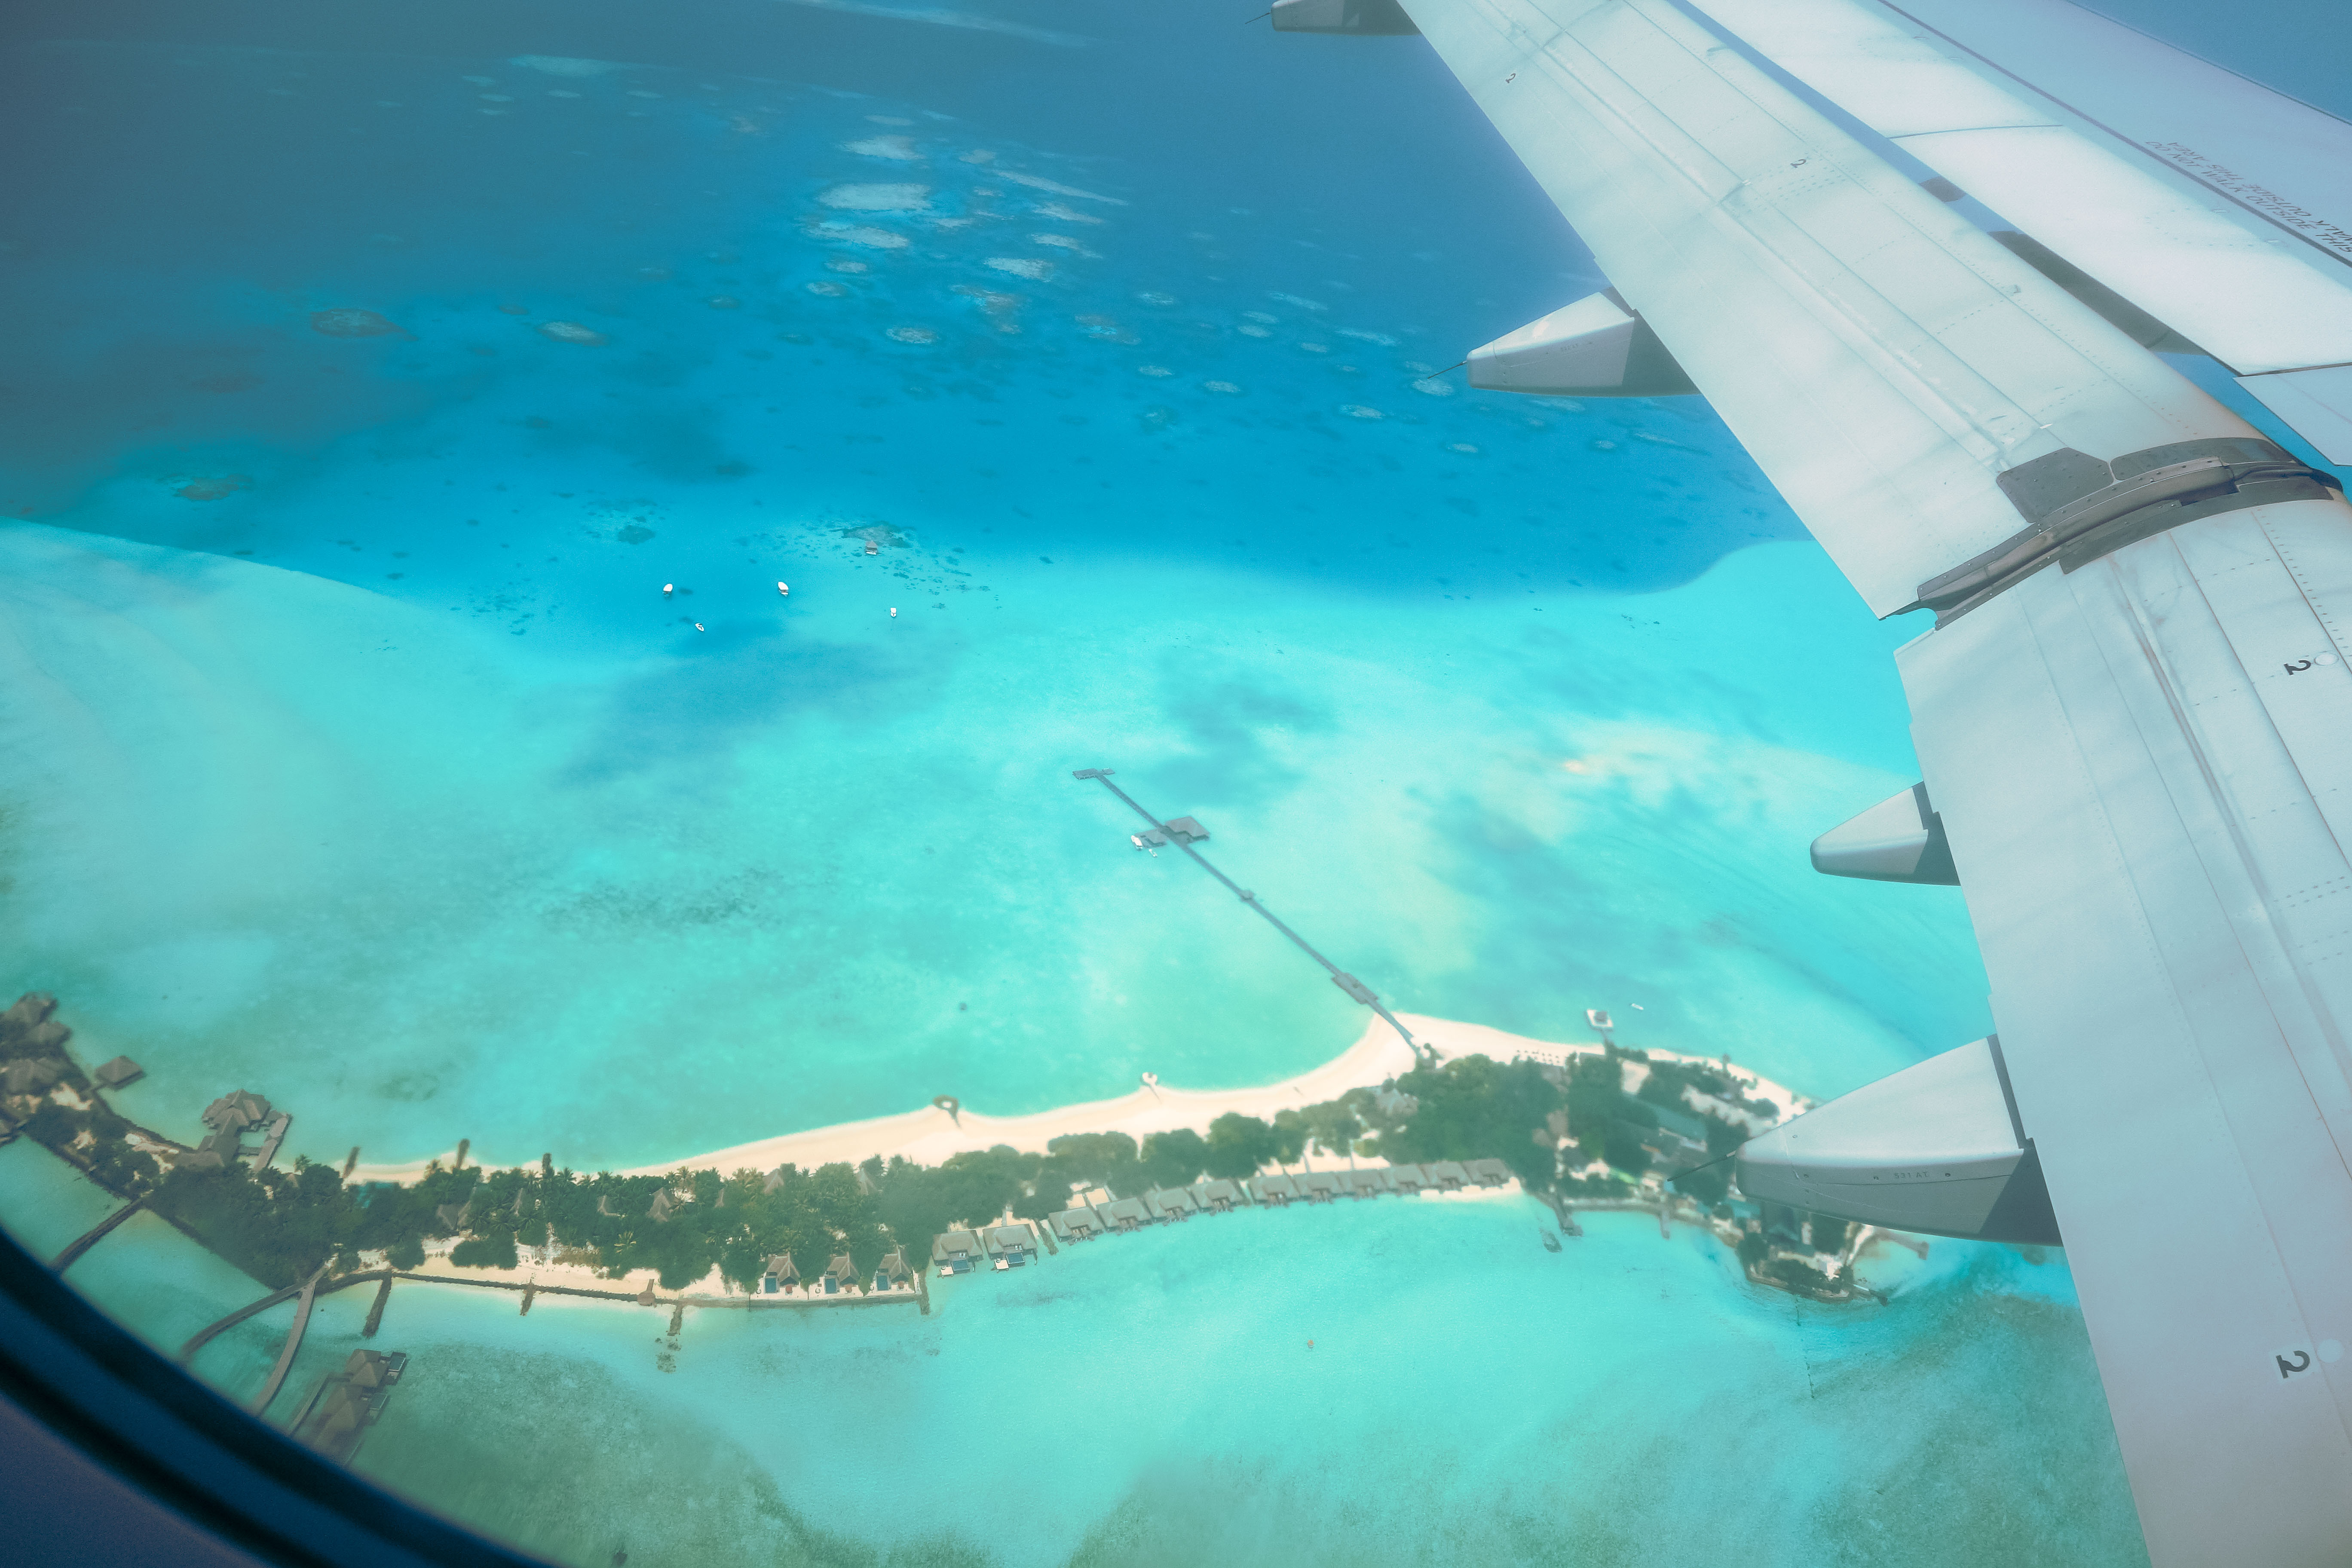 maldives from the plane view5.jpg